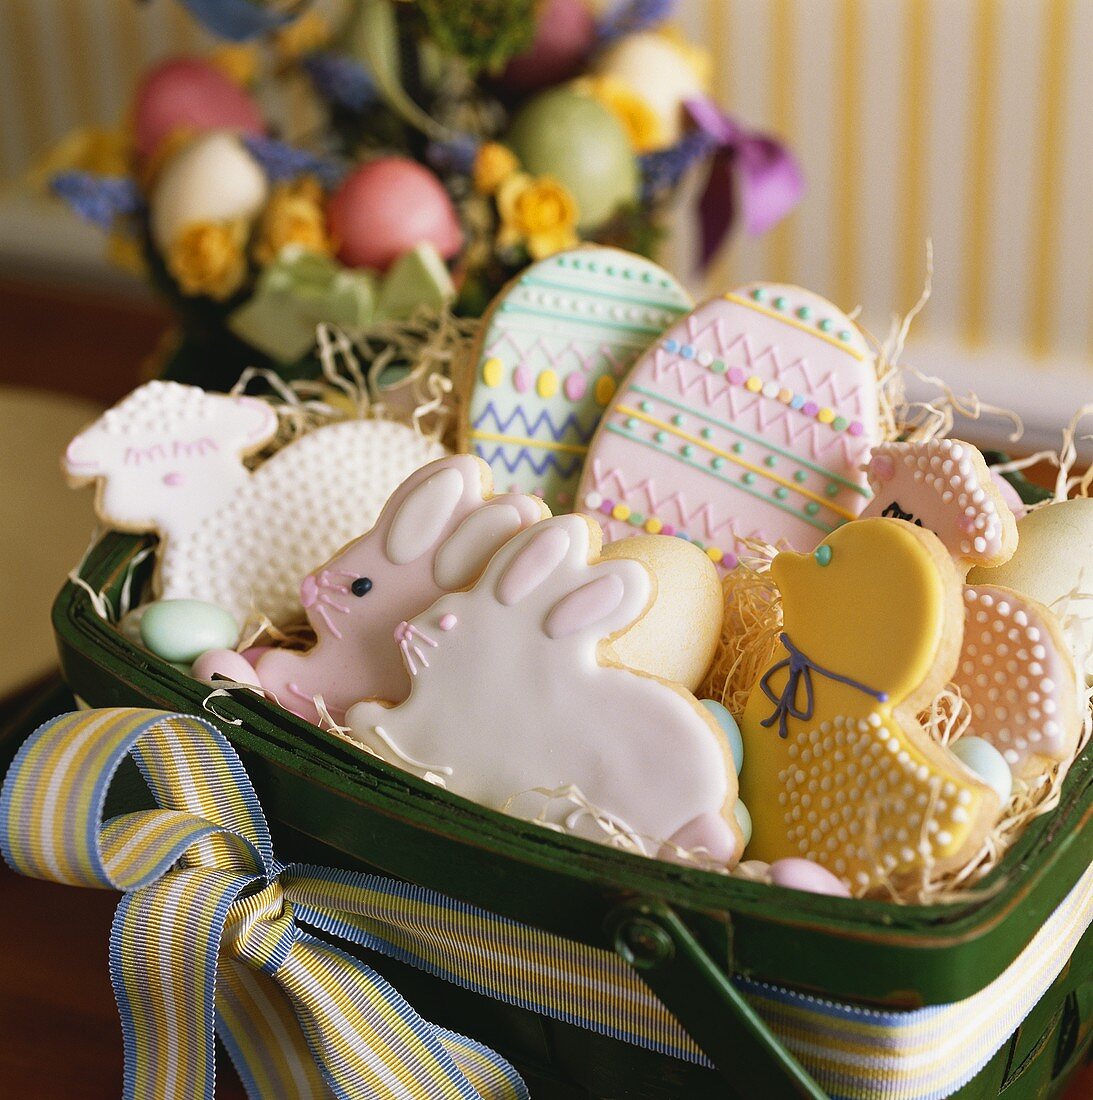 Assorted Decorated Easter Cookies in a Basket